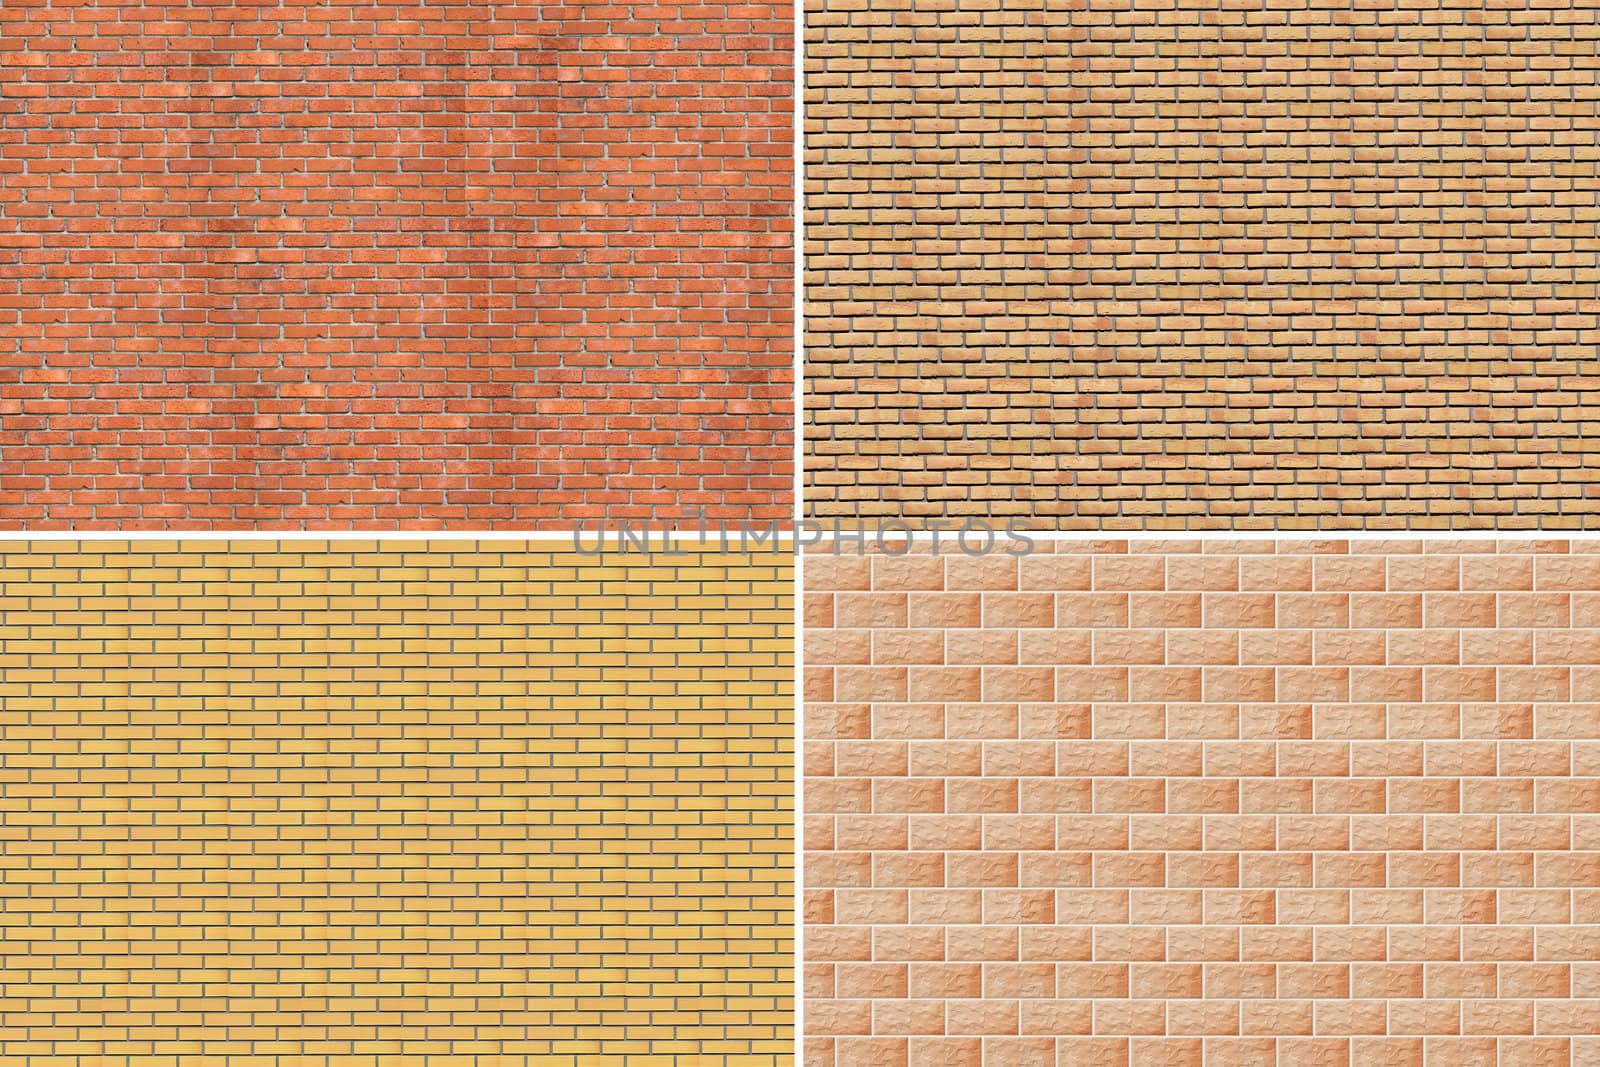 Collage. Wall of a house from a brick